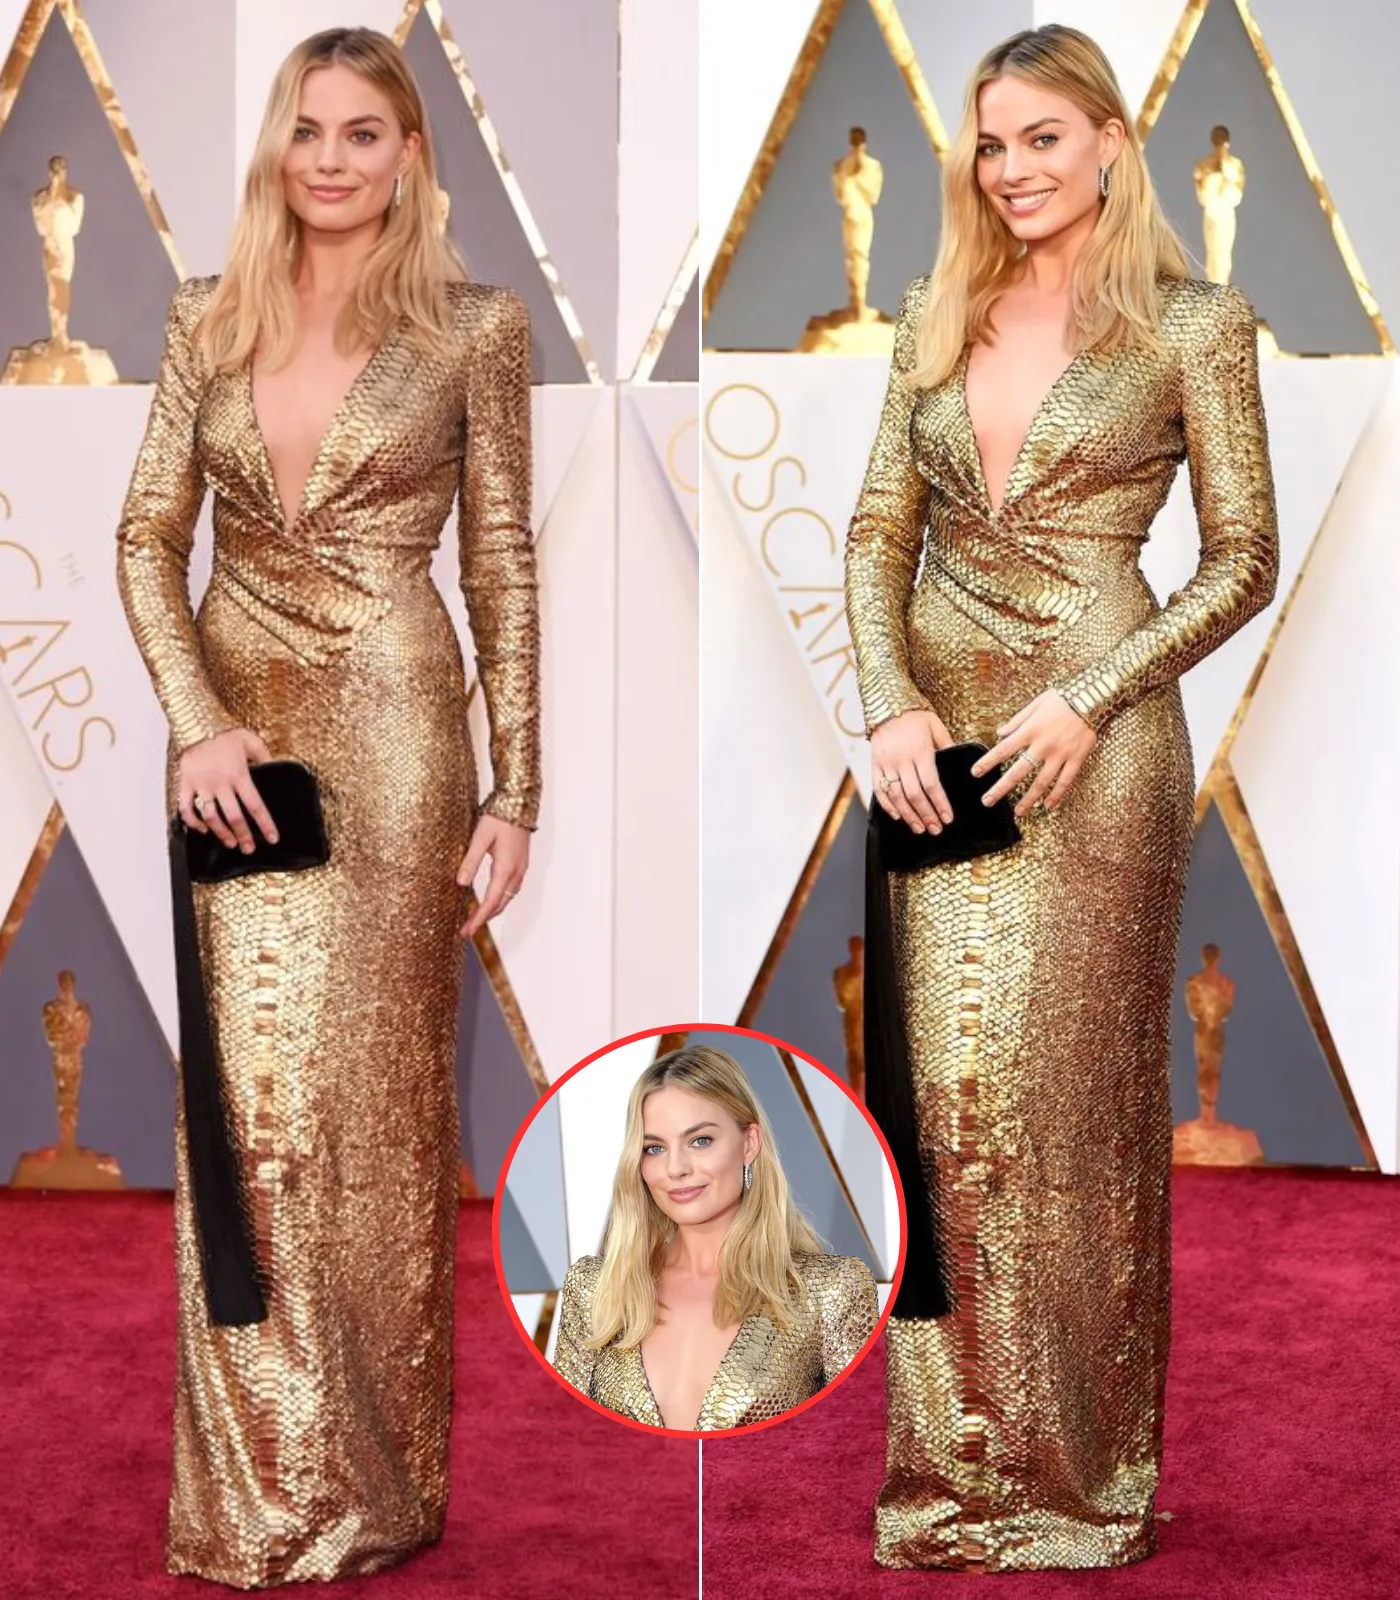 Golden girl! Margot Robbie stuns in a plunging gold snakeskin gown as she attends the Oscars